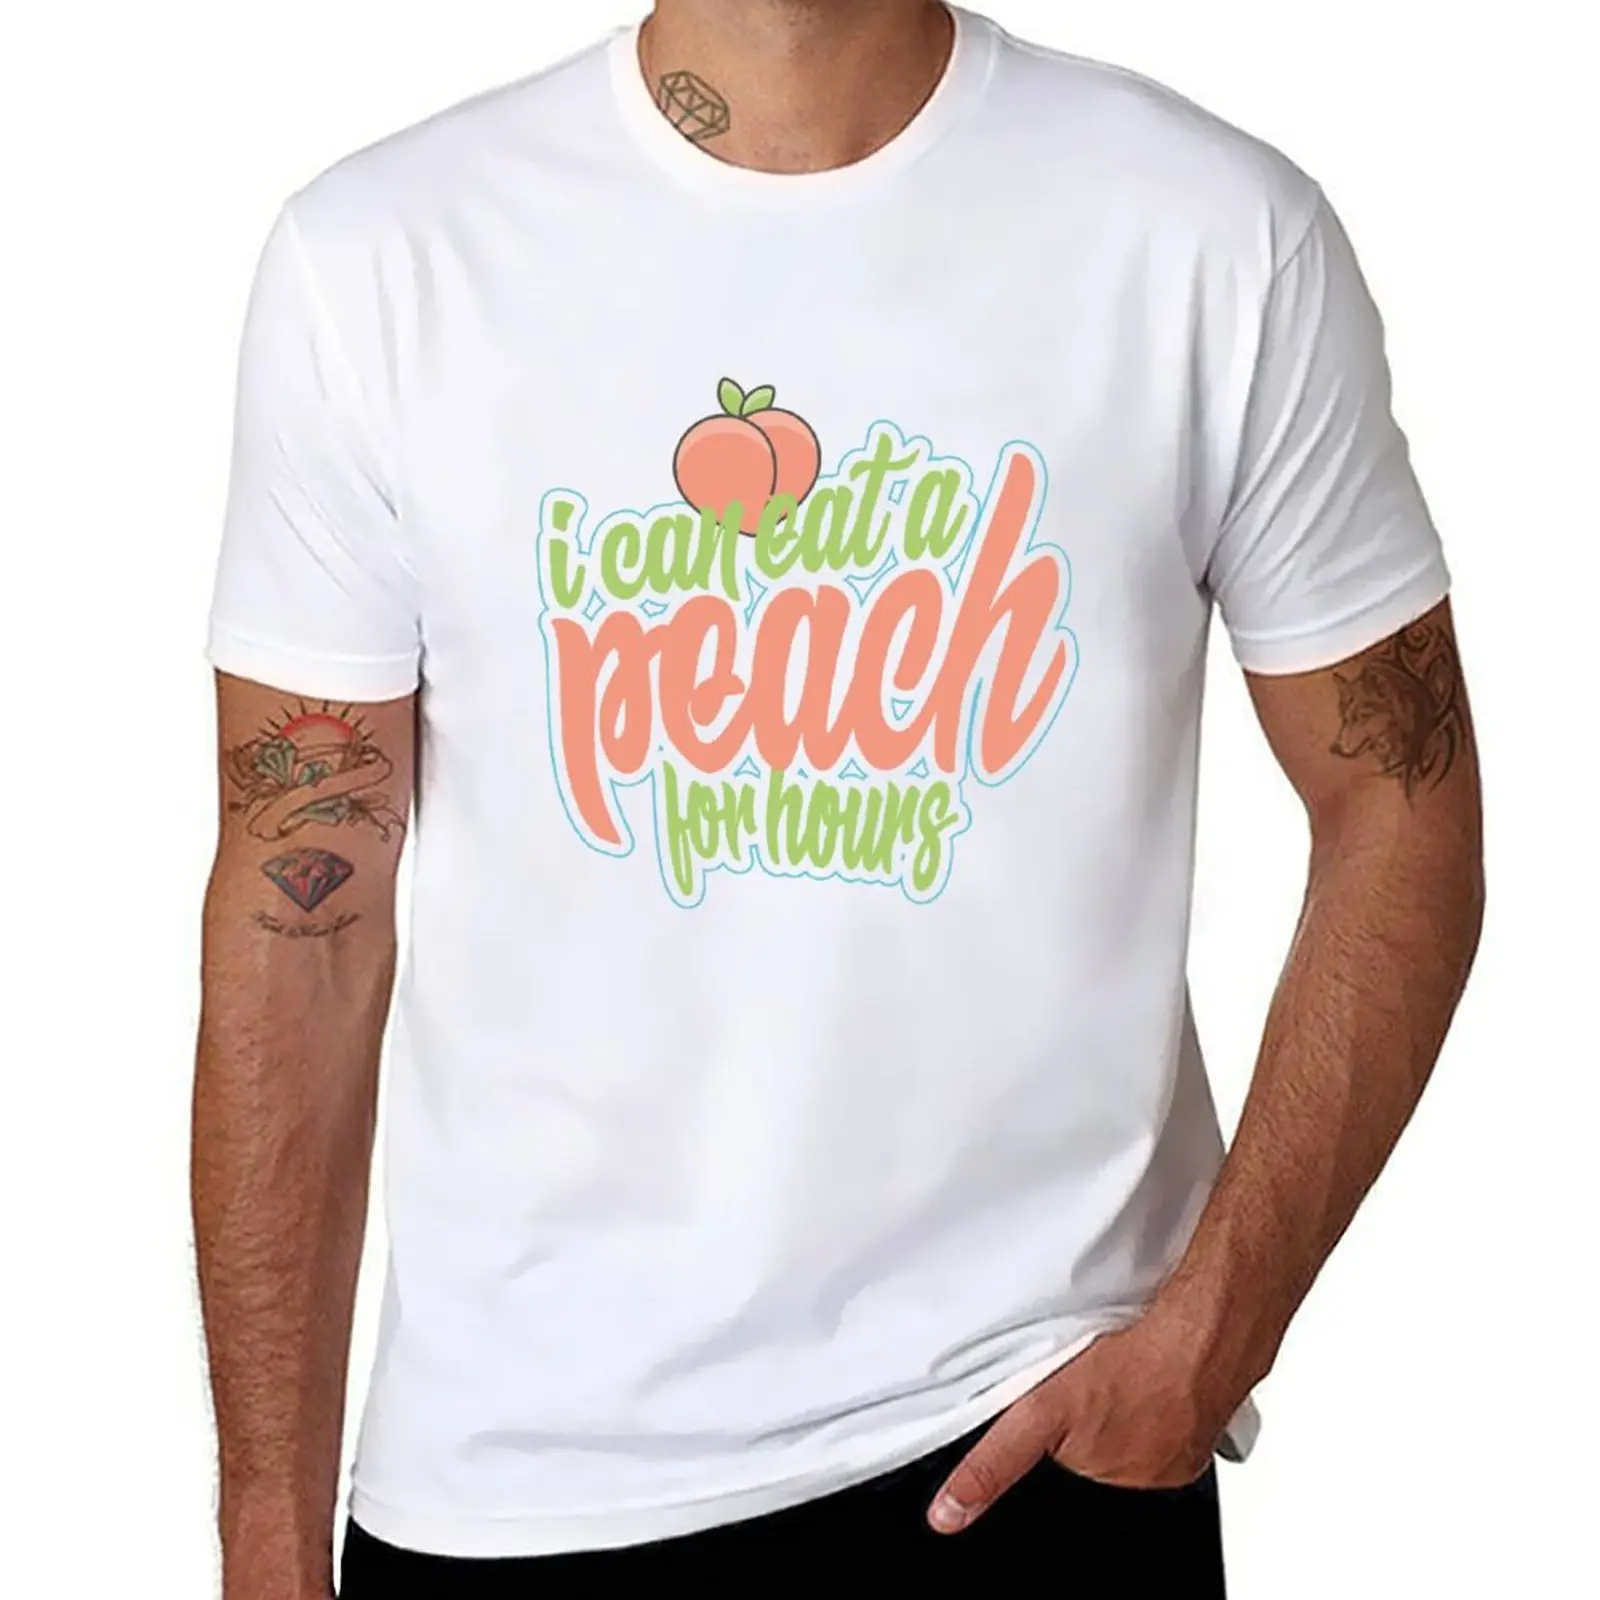 

New I can eat a Peach for hours T-Shirt Short sleeve tee summer clothes plain t shirts men